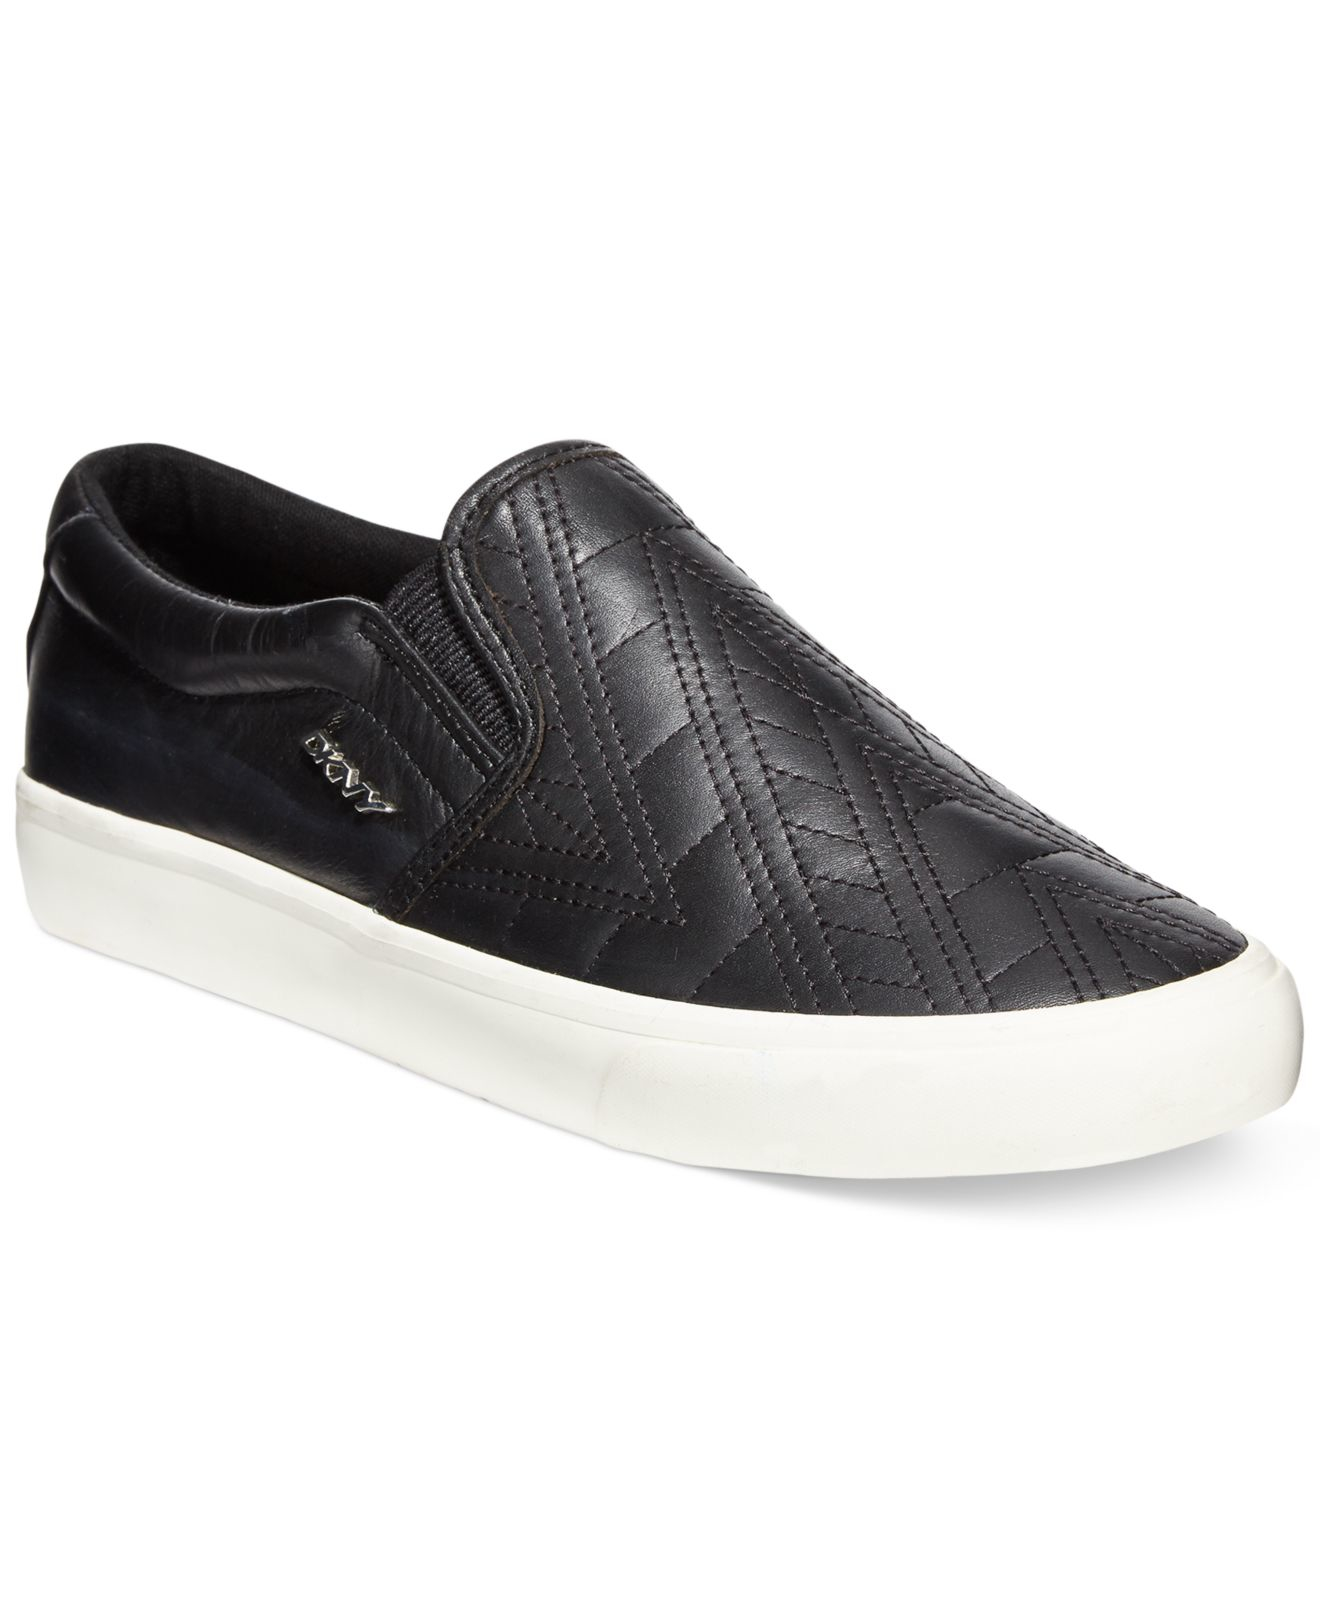 Dkny Beth Slip-on Quilted Sneakers in Black | Lyst